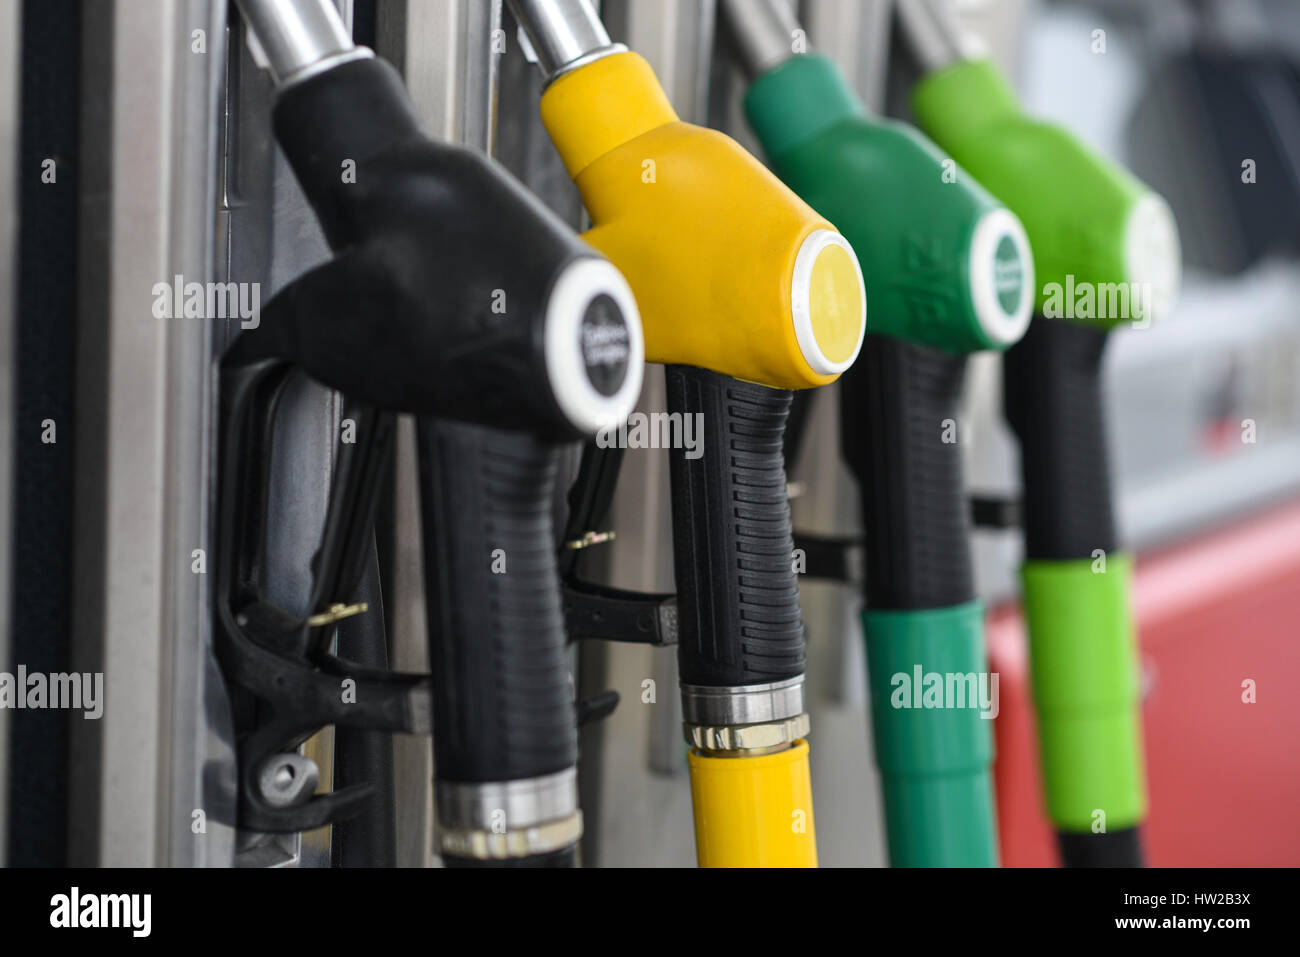 Nozzles on a fuel dispenser machine at a petrol station Stock Photo